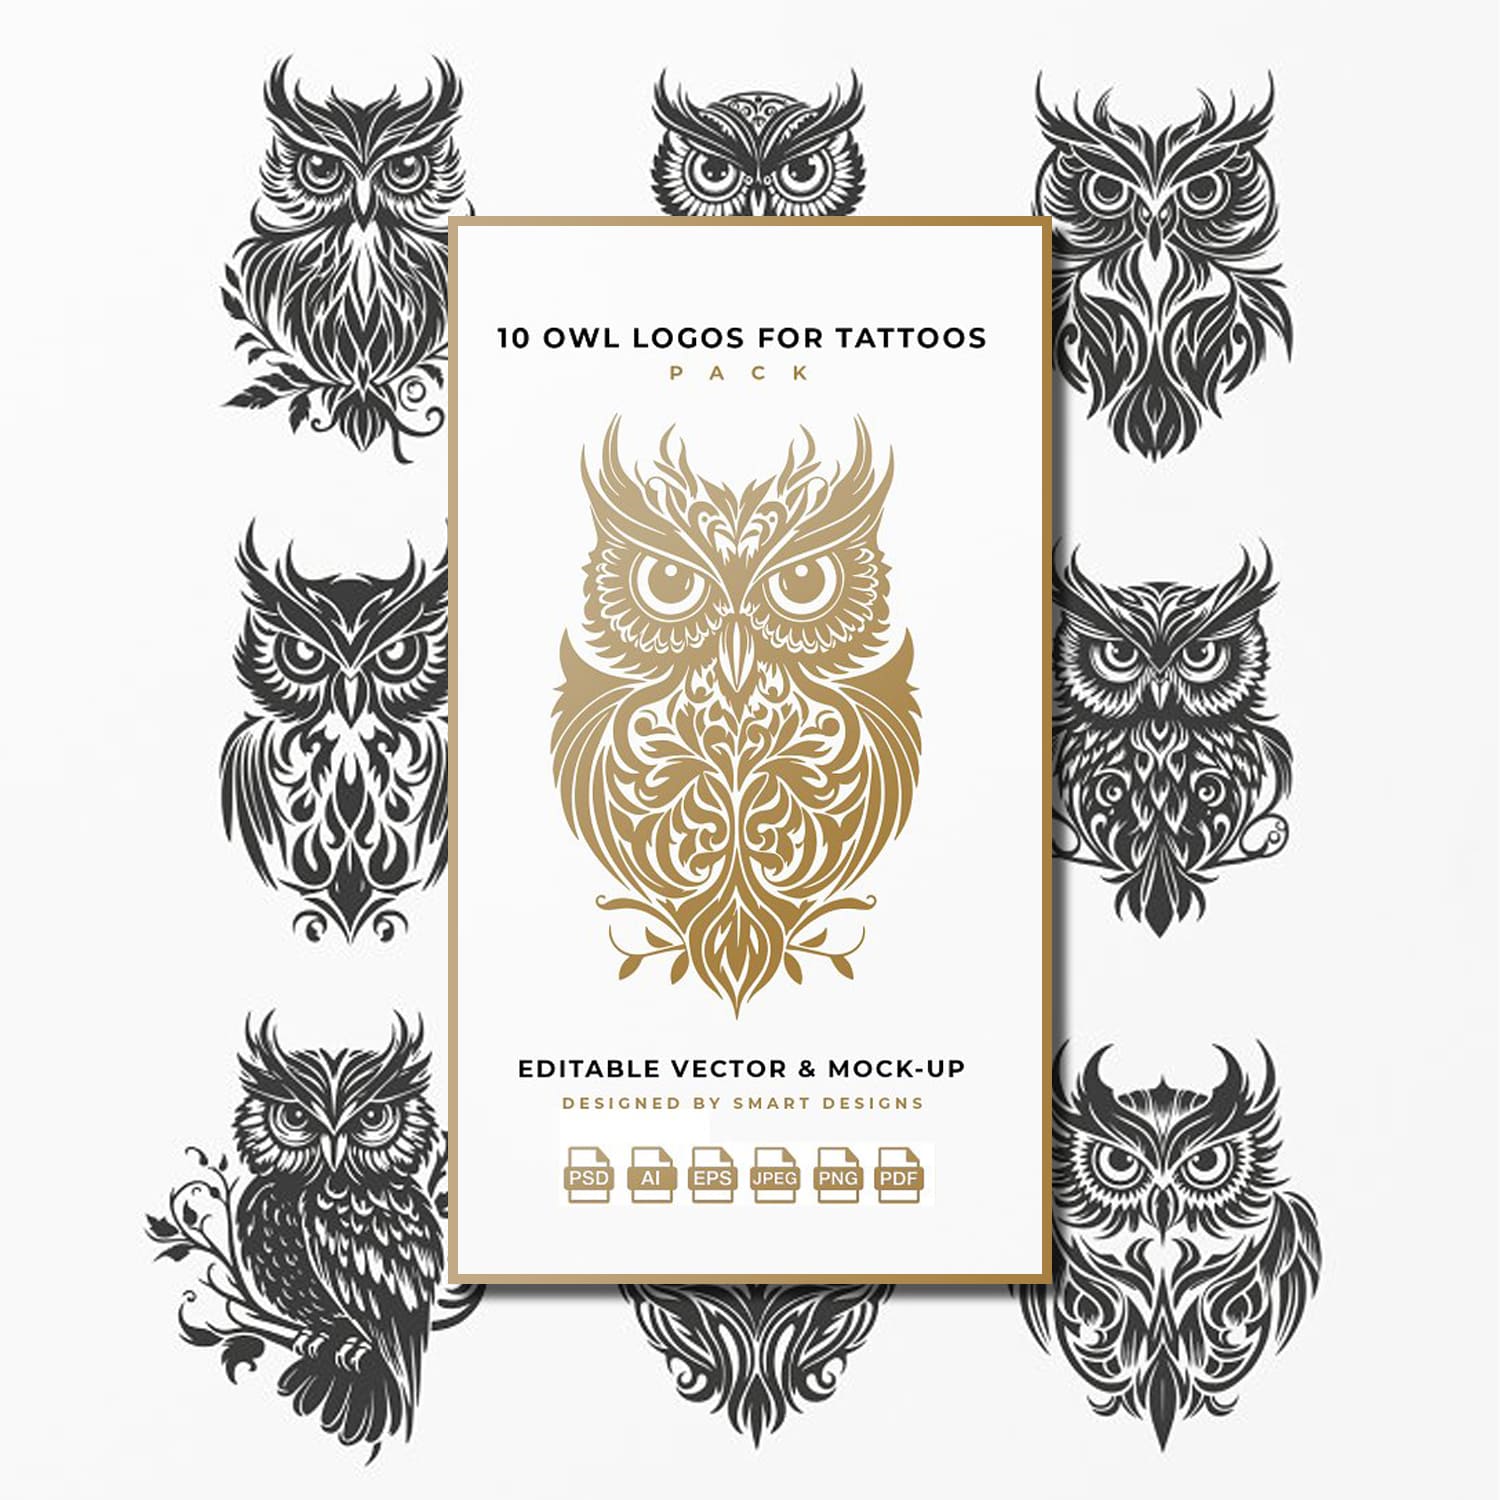 Images of decorative owls for tattoos for every taste.